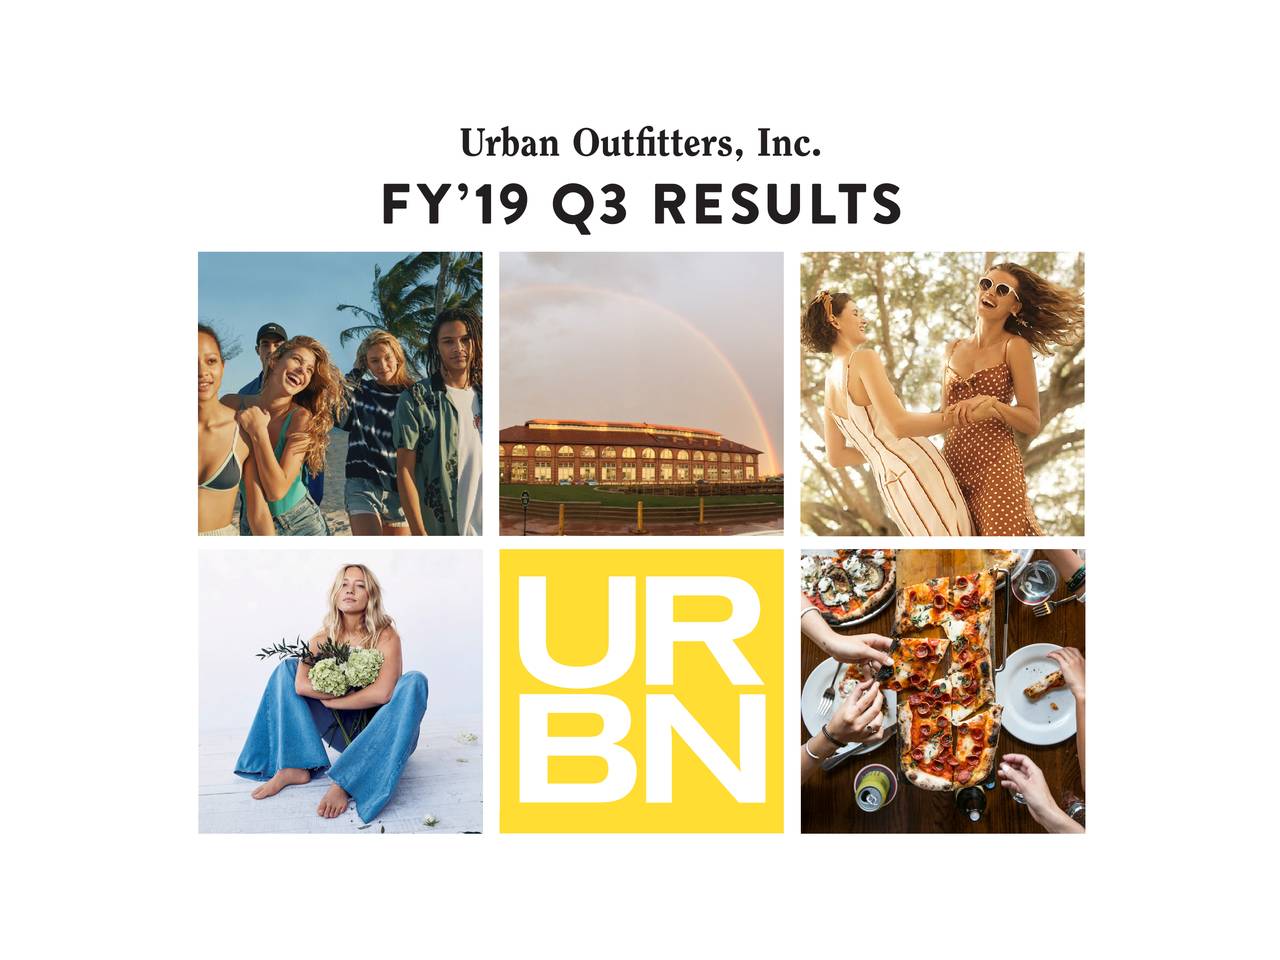 FY’ 19 Q3 RESULTS